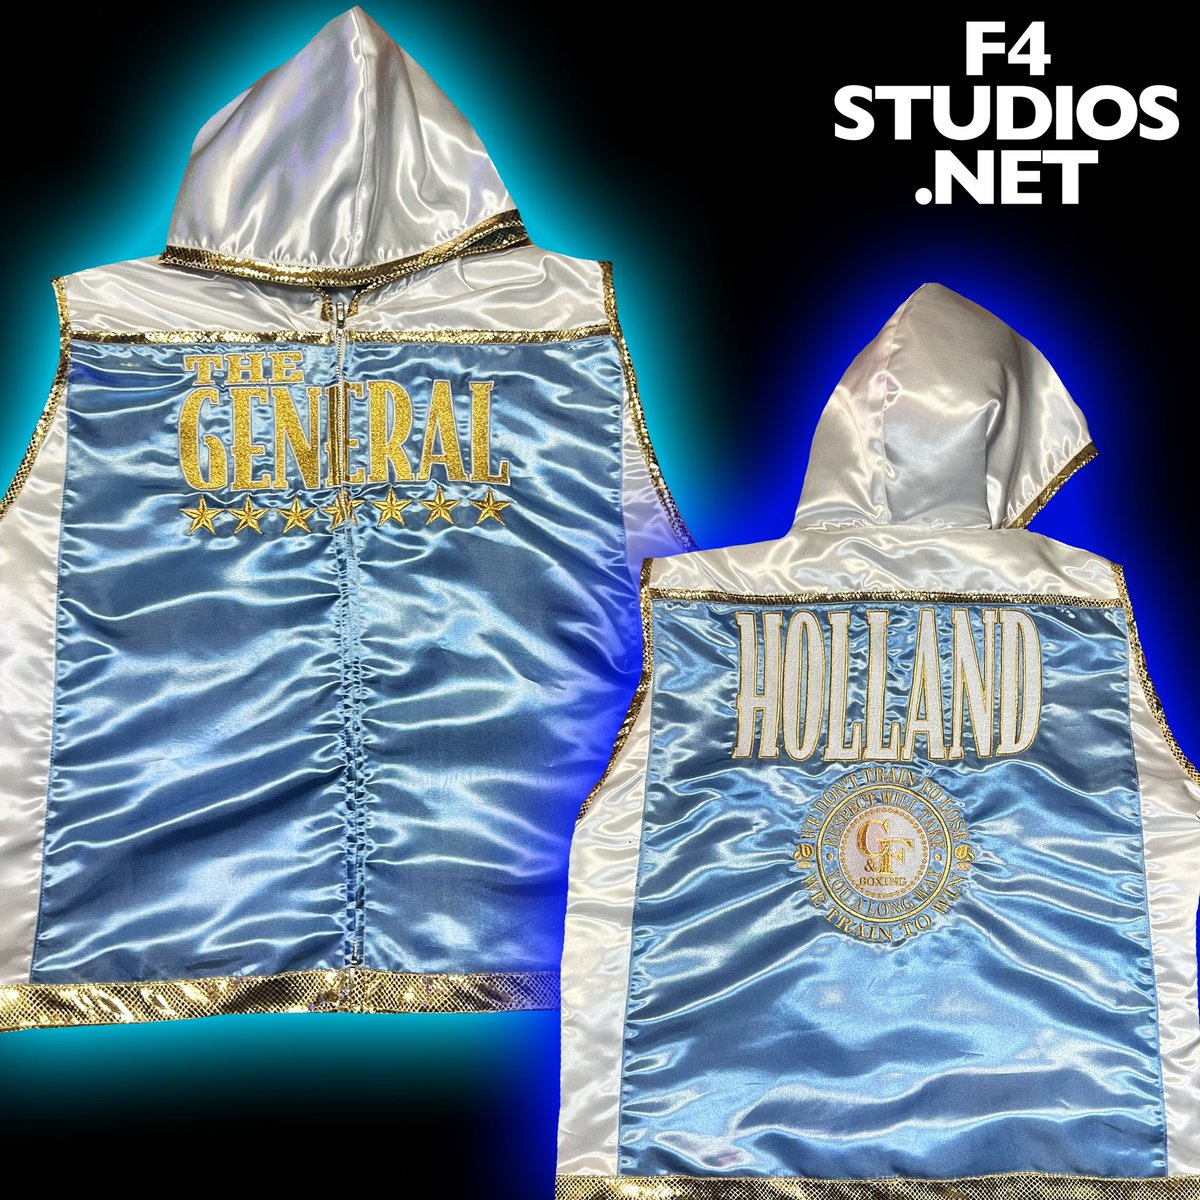 Custom Outfit for Gregory “The General” Holland @lightskingeneral #F4STUDIOS  #customboxingoutfits #boxingoutfits #boxingoutfit #fightwear2champions #boxingkit #customboxingkits #customoutfit #proboxer #boxinguniforms #boxingtrunks  #boxingshorts #boxing #boxinglifestyle #boxeo